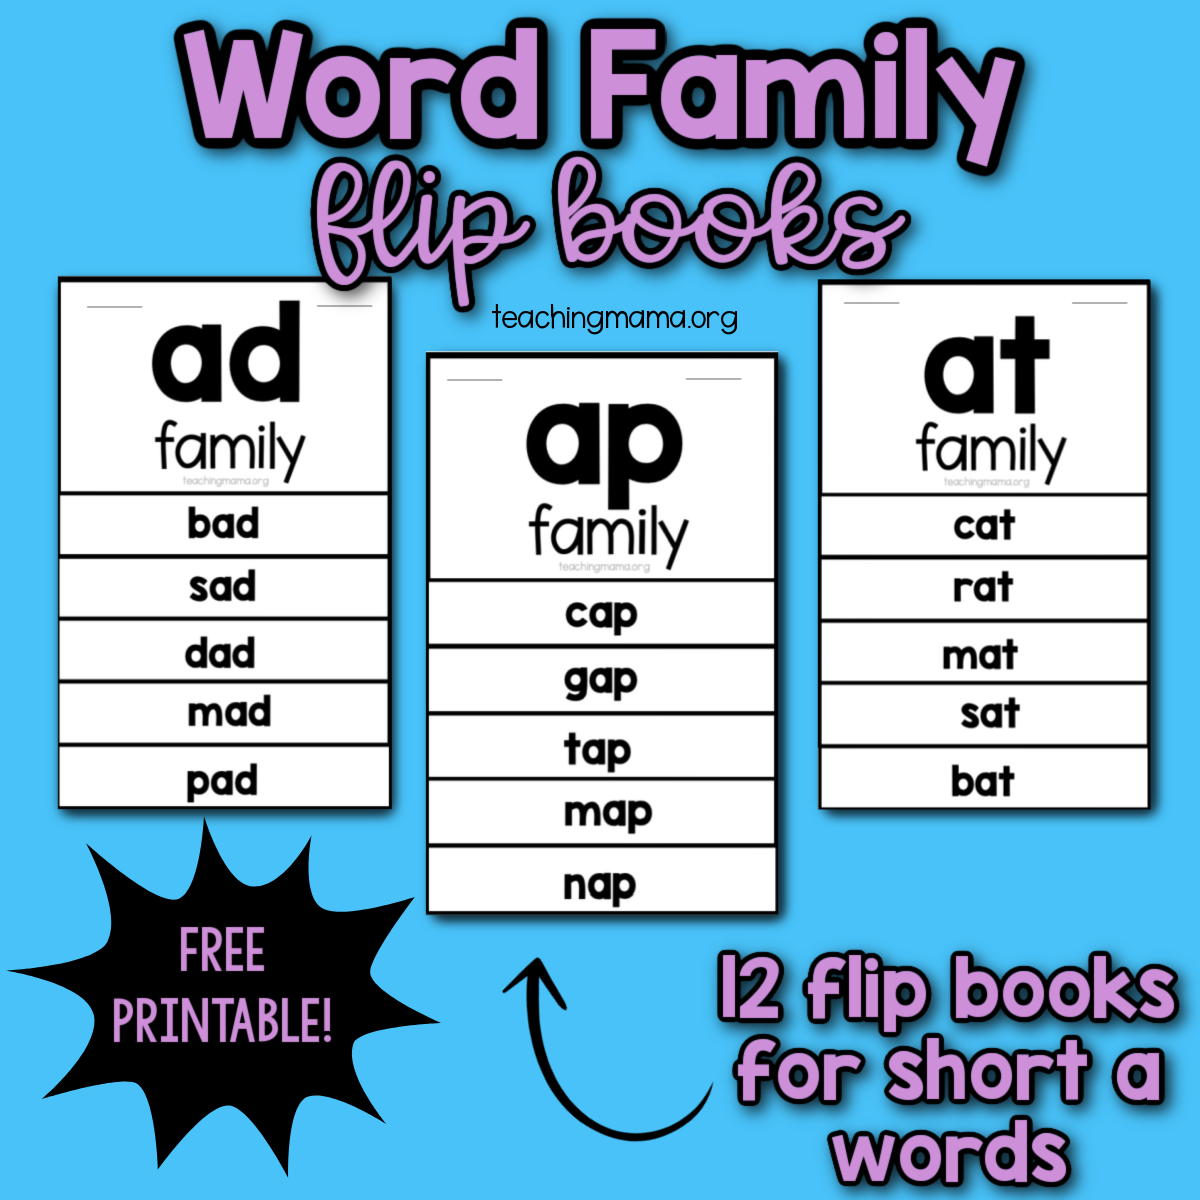 FREE Printable Word Family Books for Short Vowels - This Reading Mama